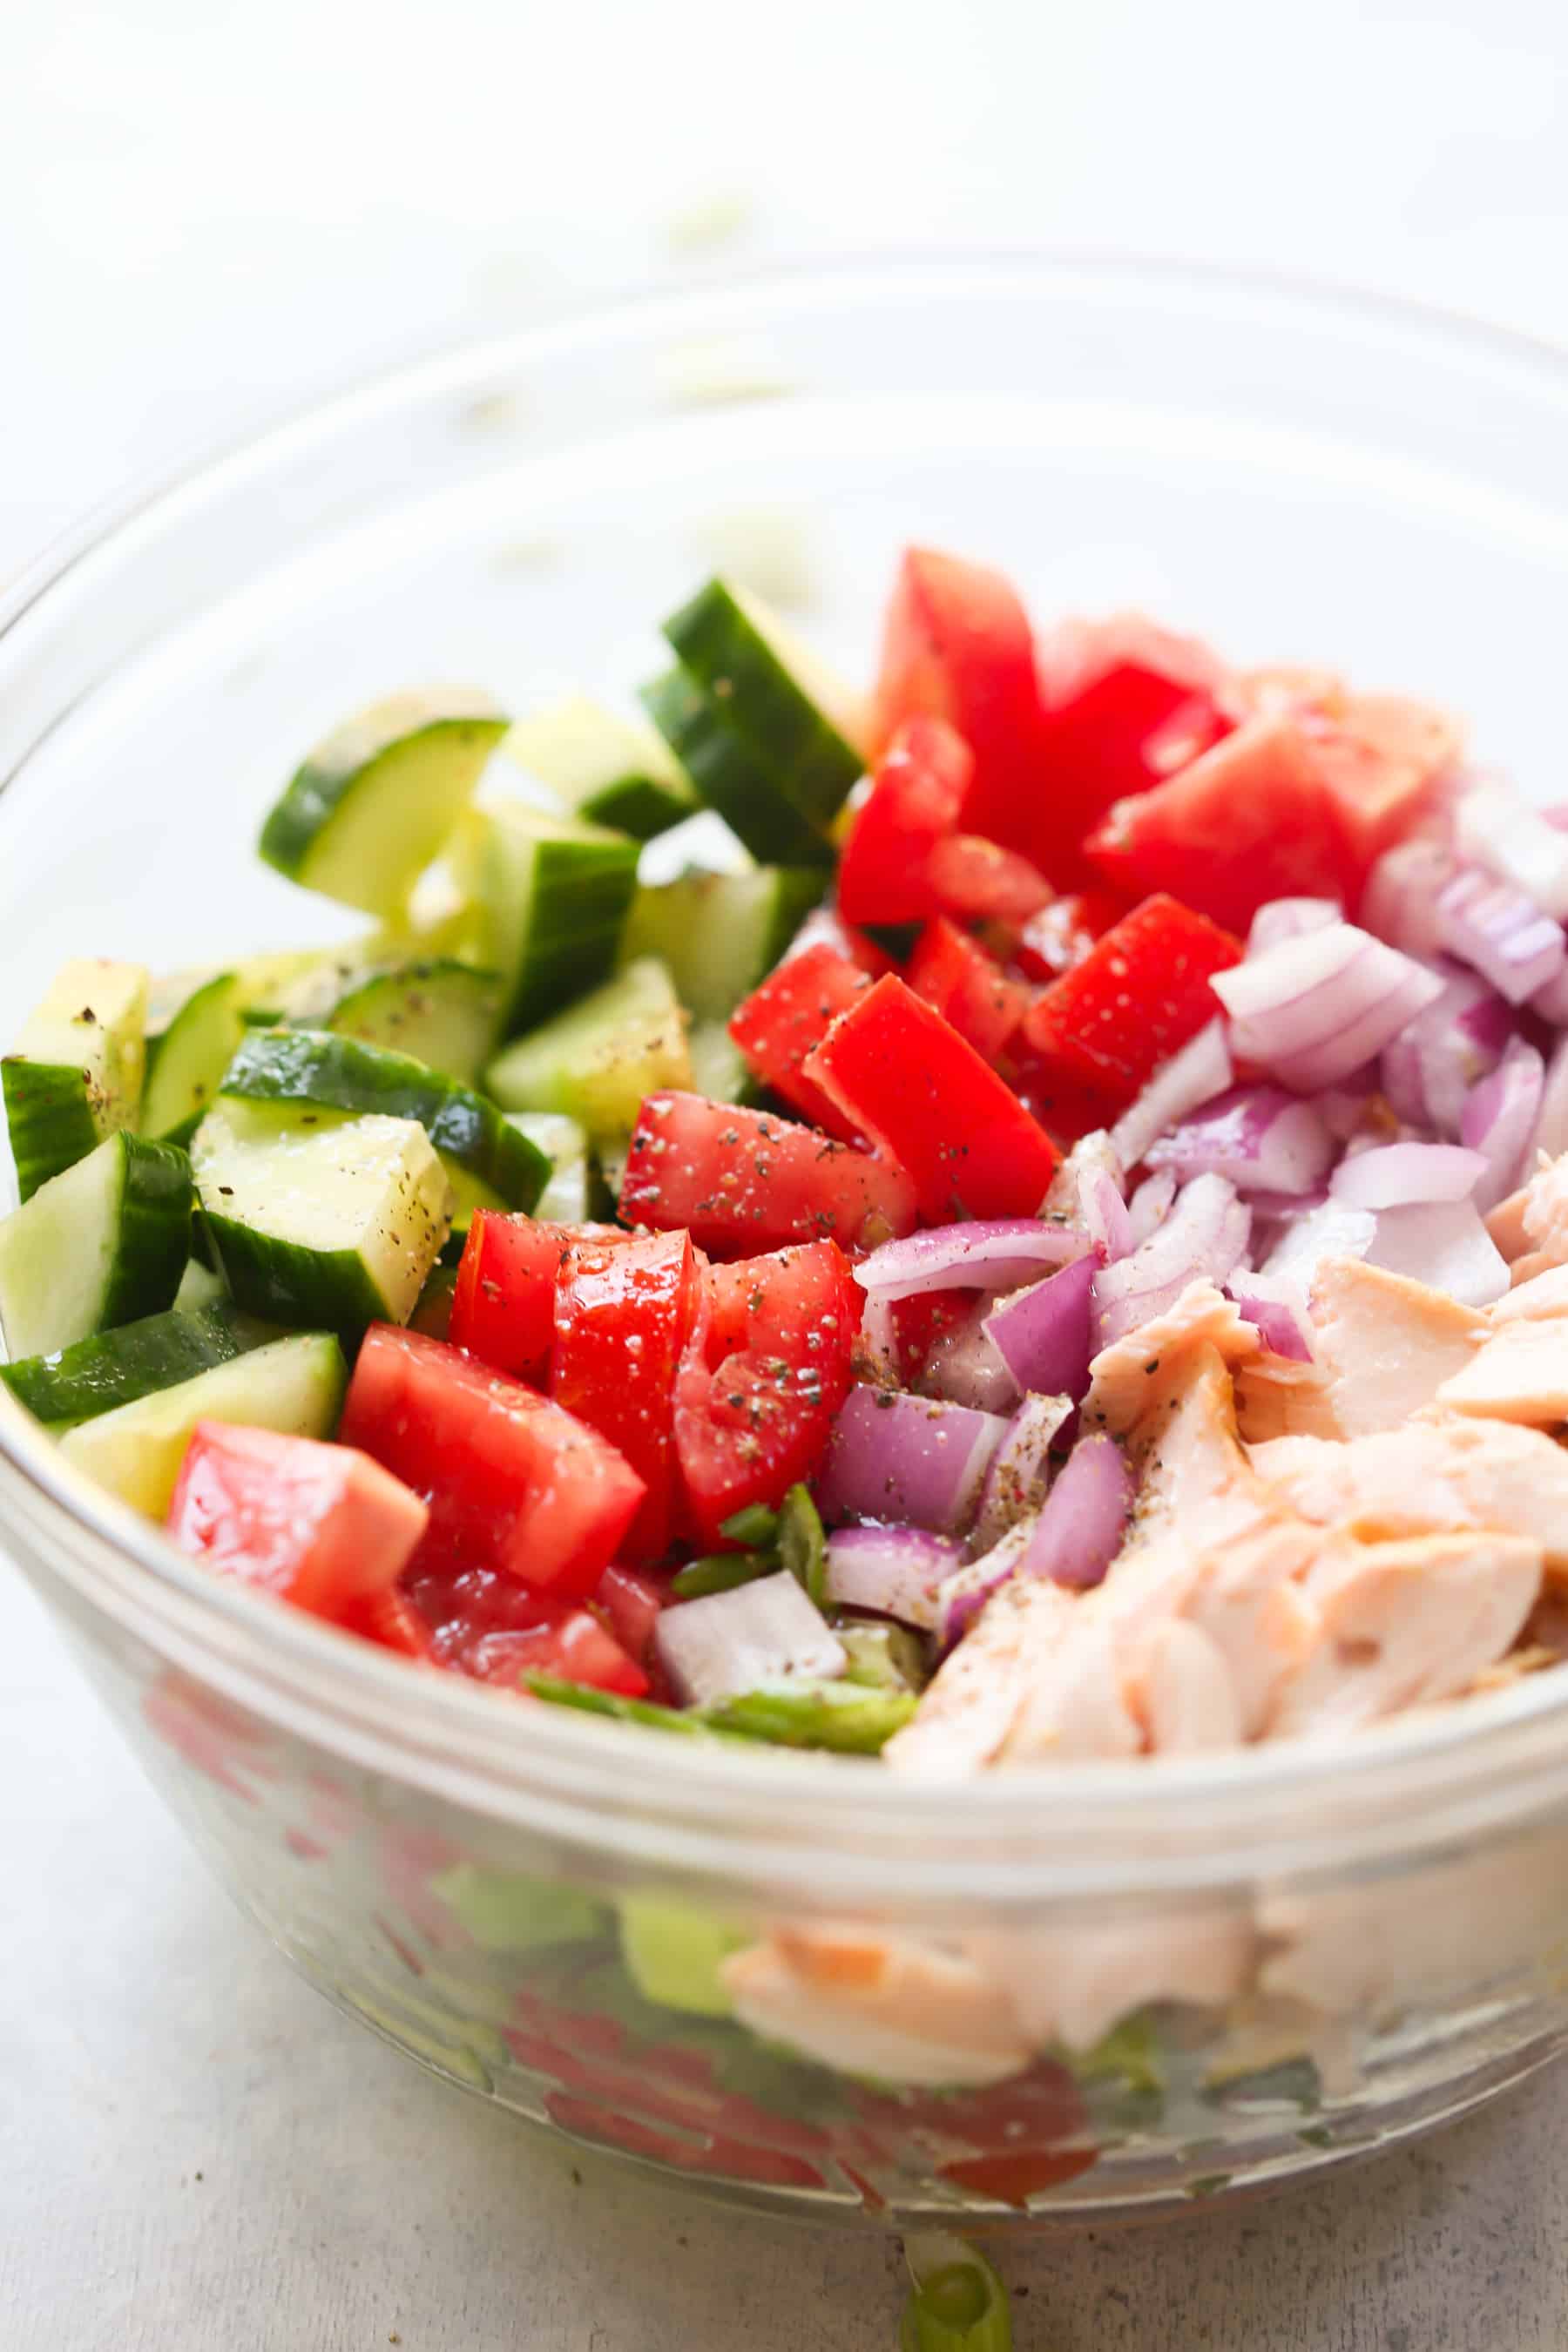 Salmon Chopped Salad recipe - Salmon Chopped Salad recipe is quick and easy to make, packed with protein, healthy fats and it’s flavoured with lemon vinaigrette.